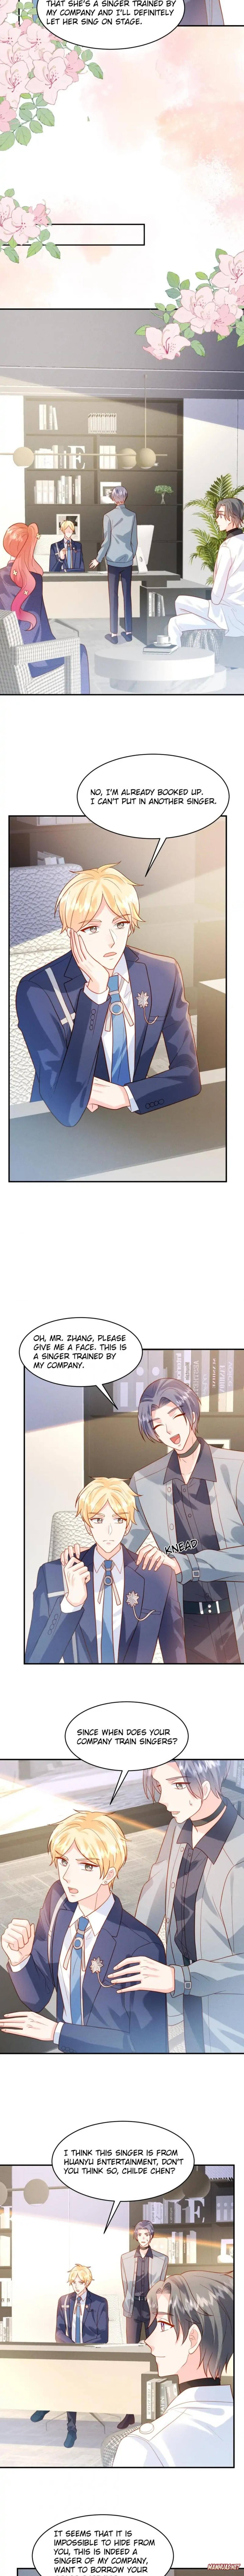 Rebirth Begins With Refusal Of Marriage - Page 4